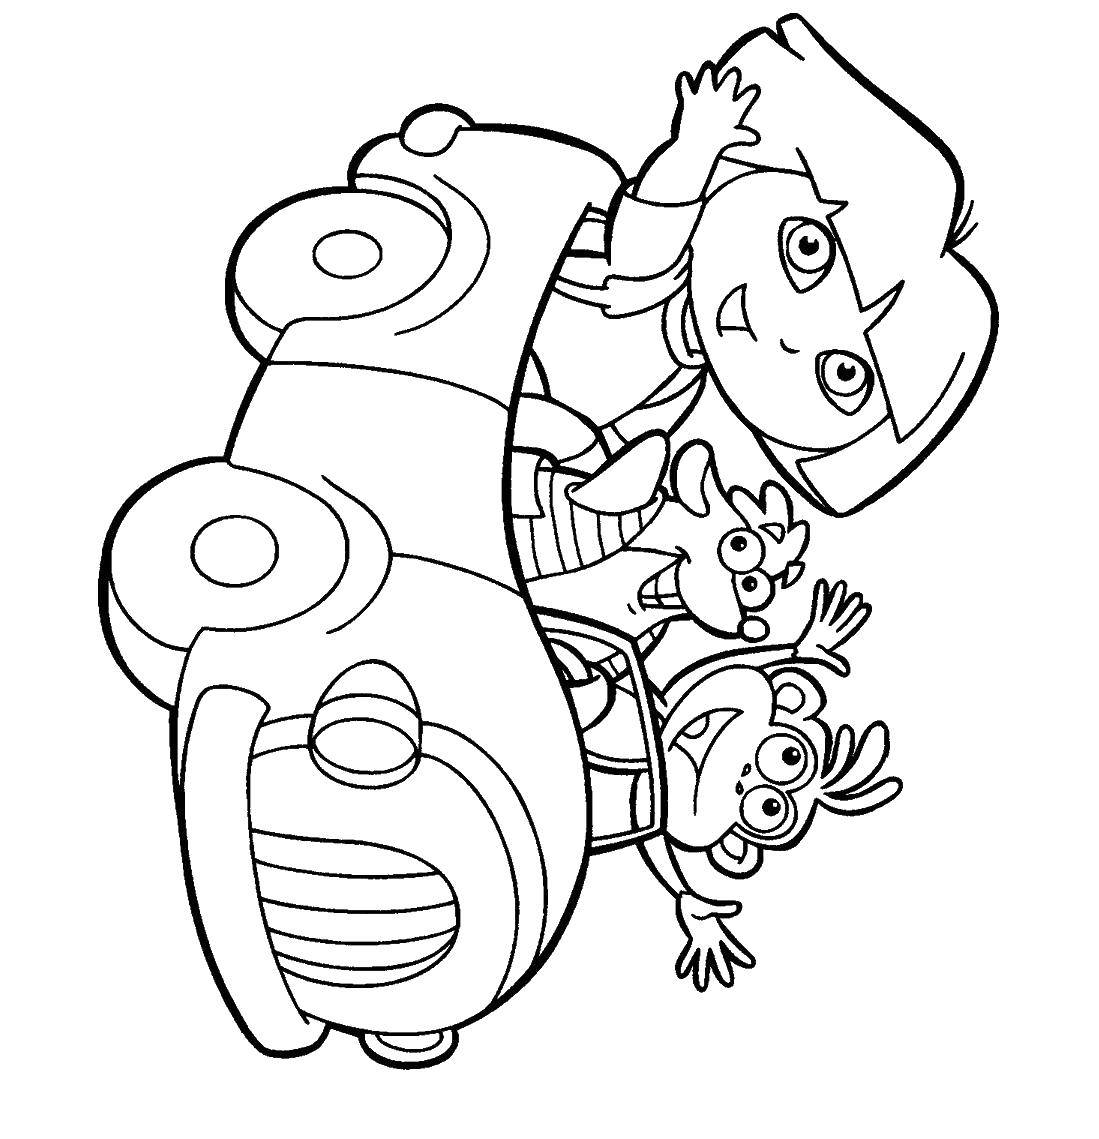 Coloring Dasha and slipper on the machine. Category Dasha traveler. Tags:  Cartoon character.